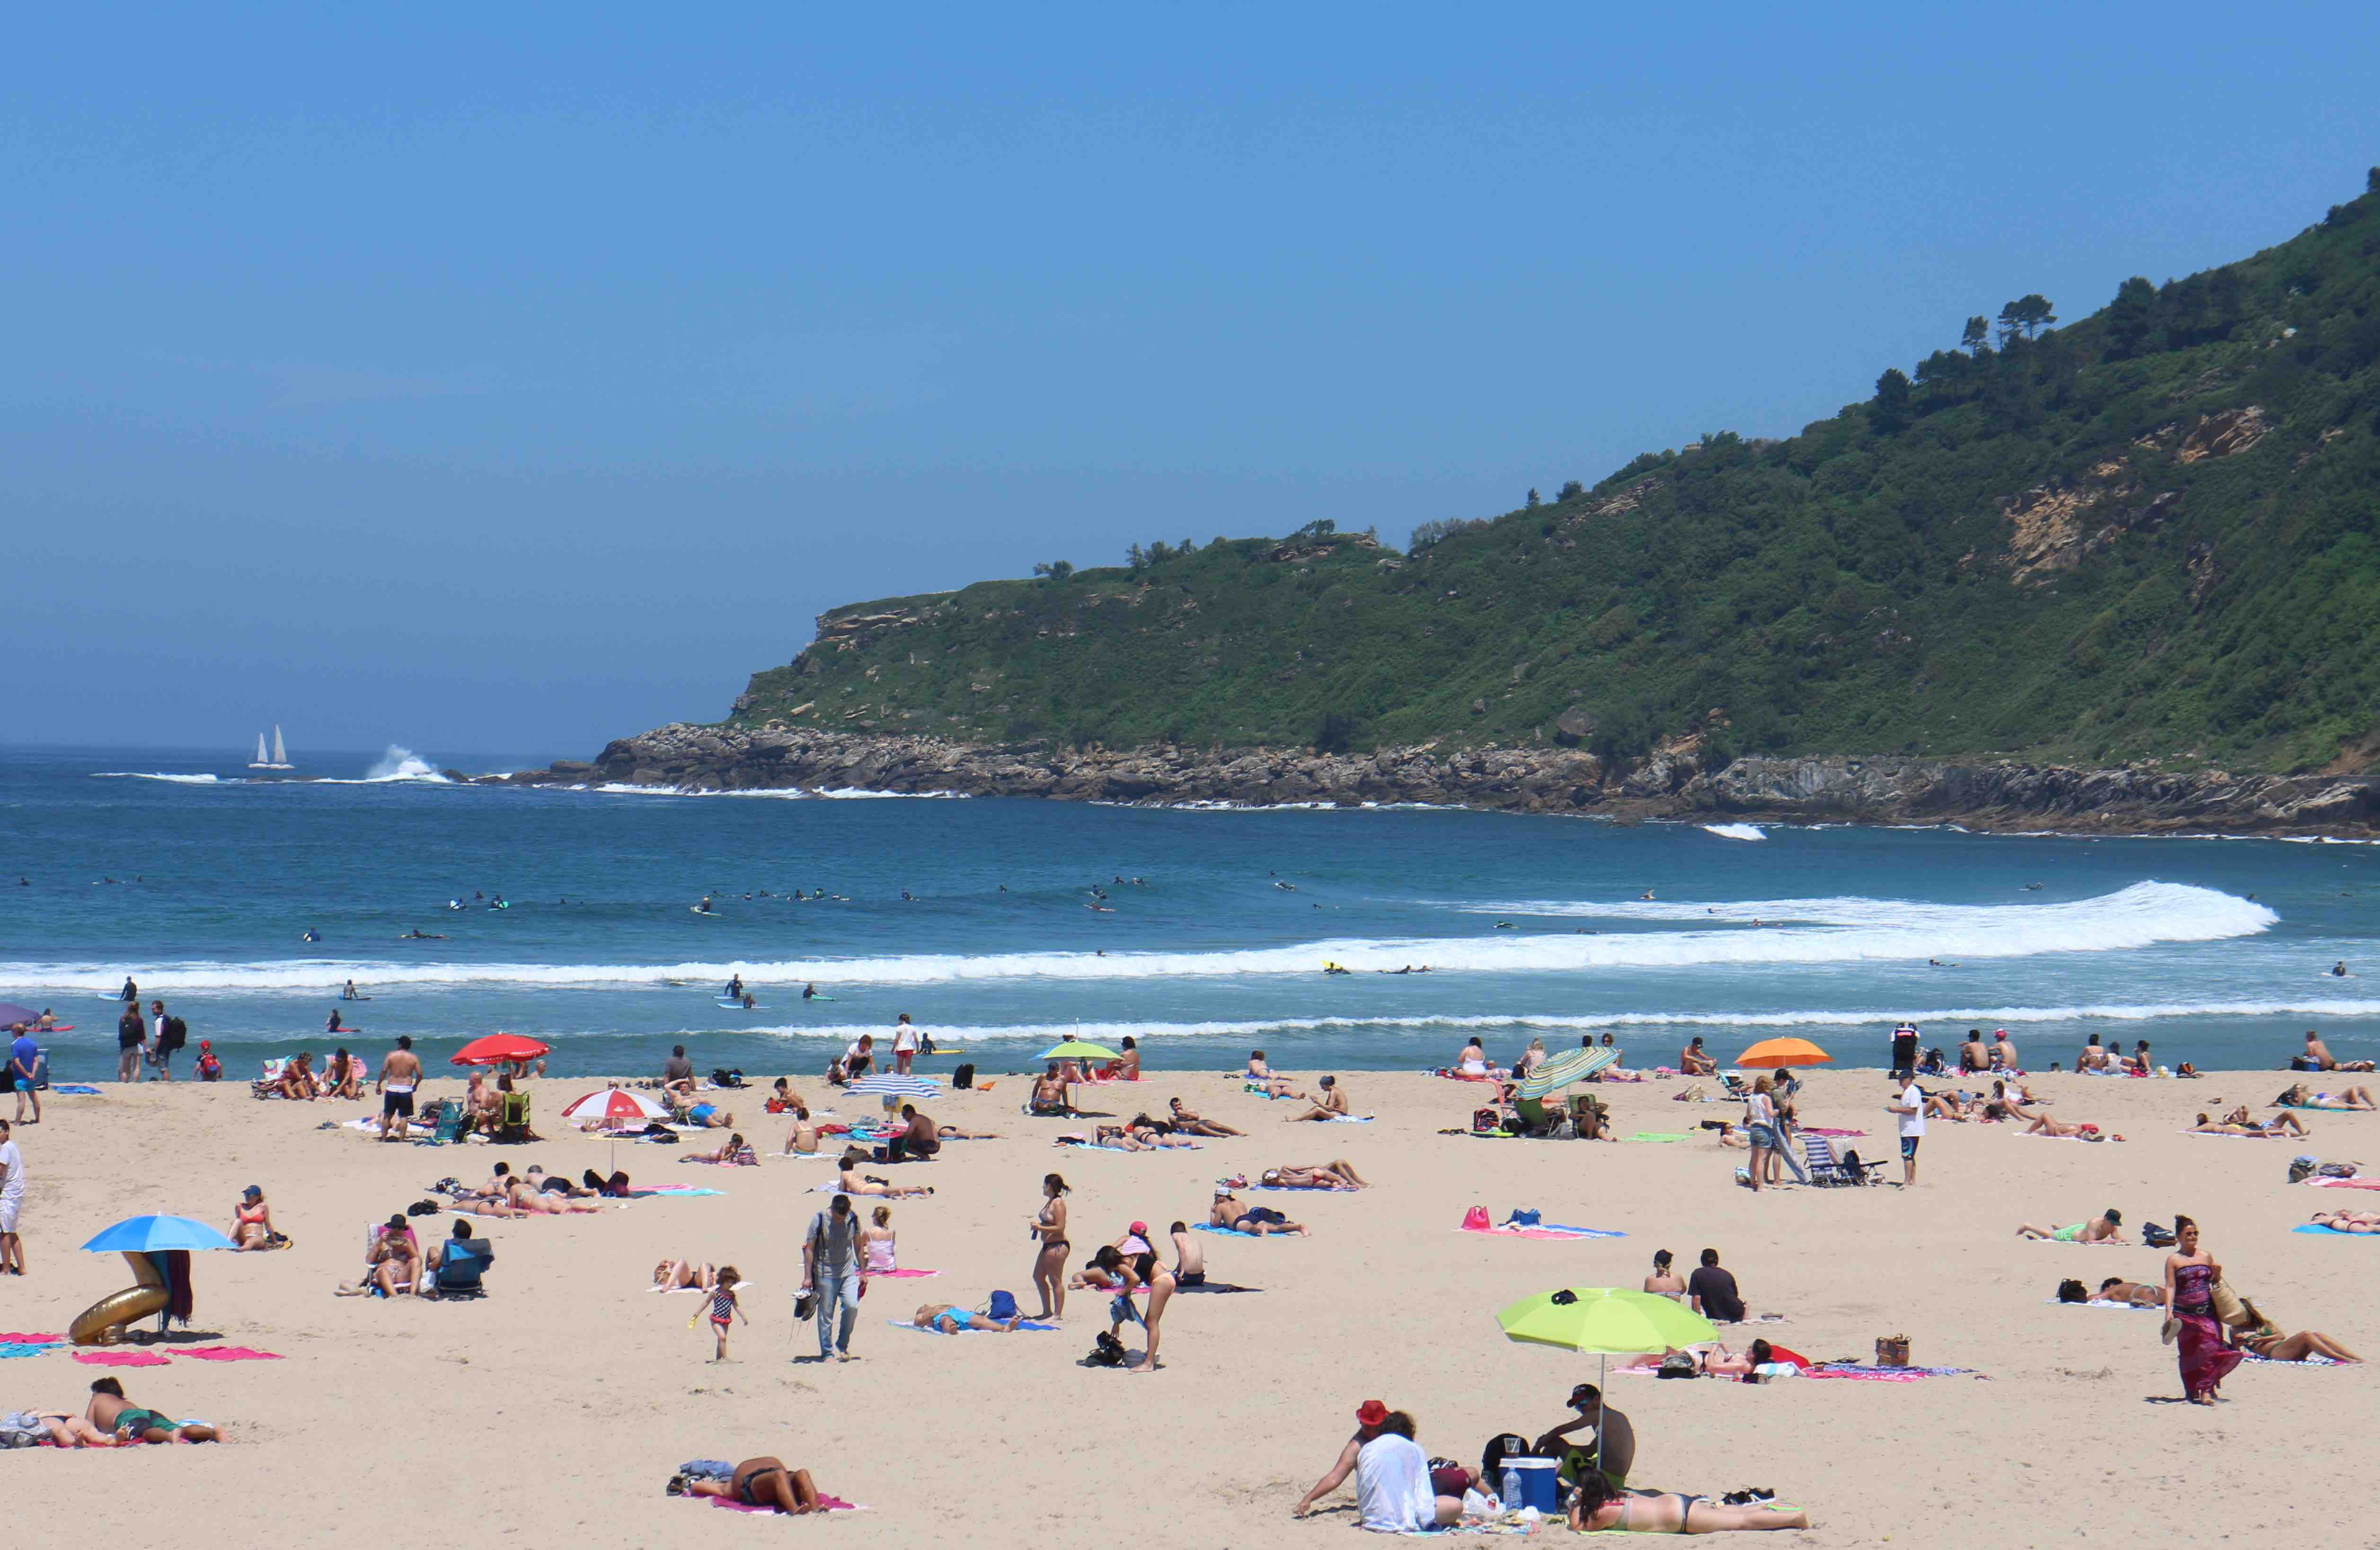 Zurriola Playa is a great spot for surf, sport and fun